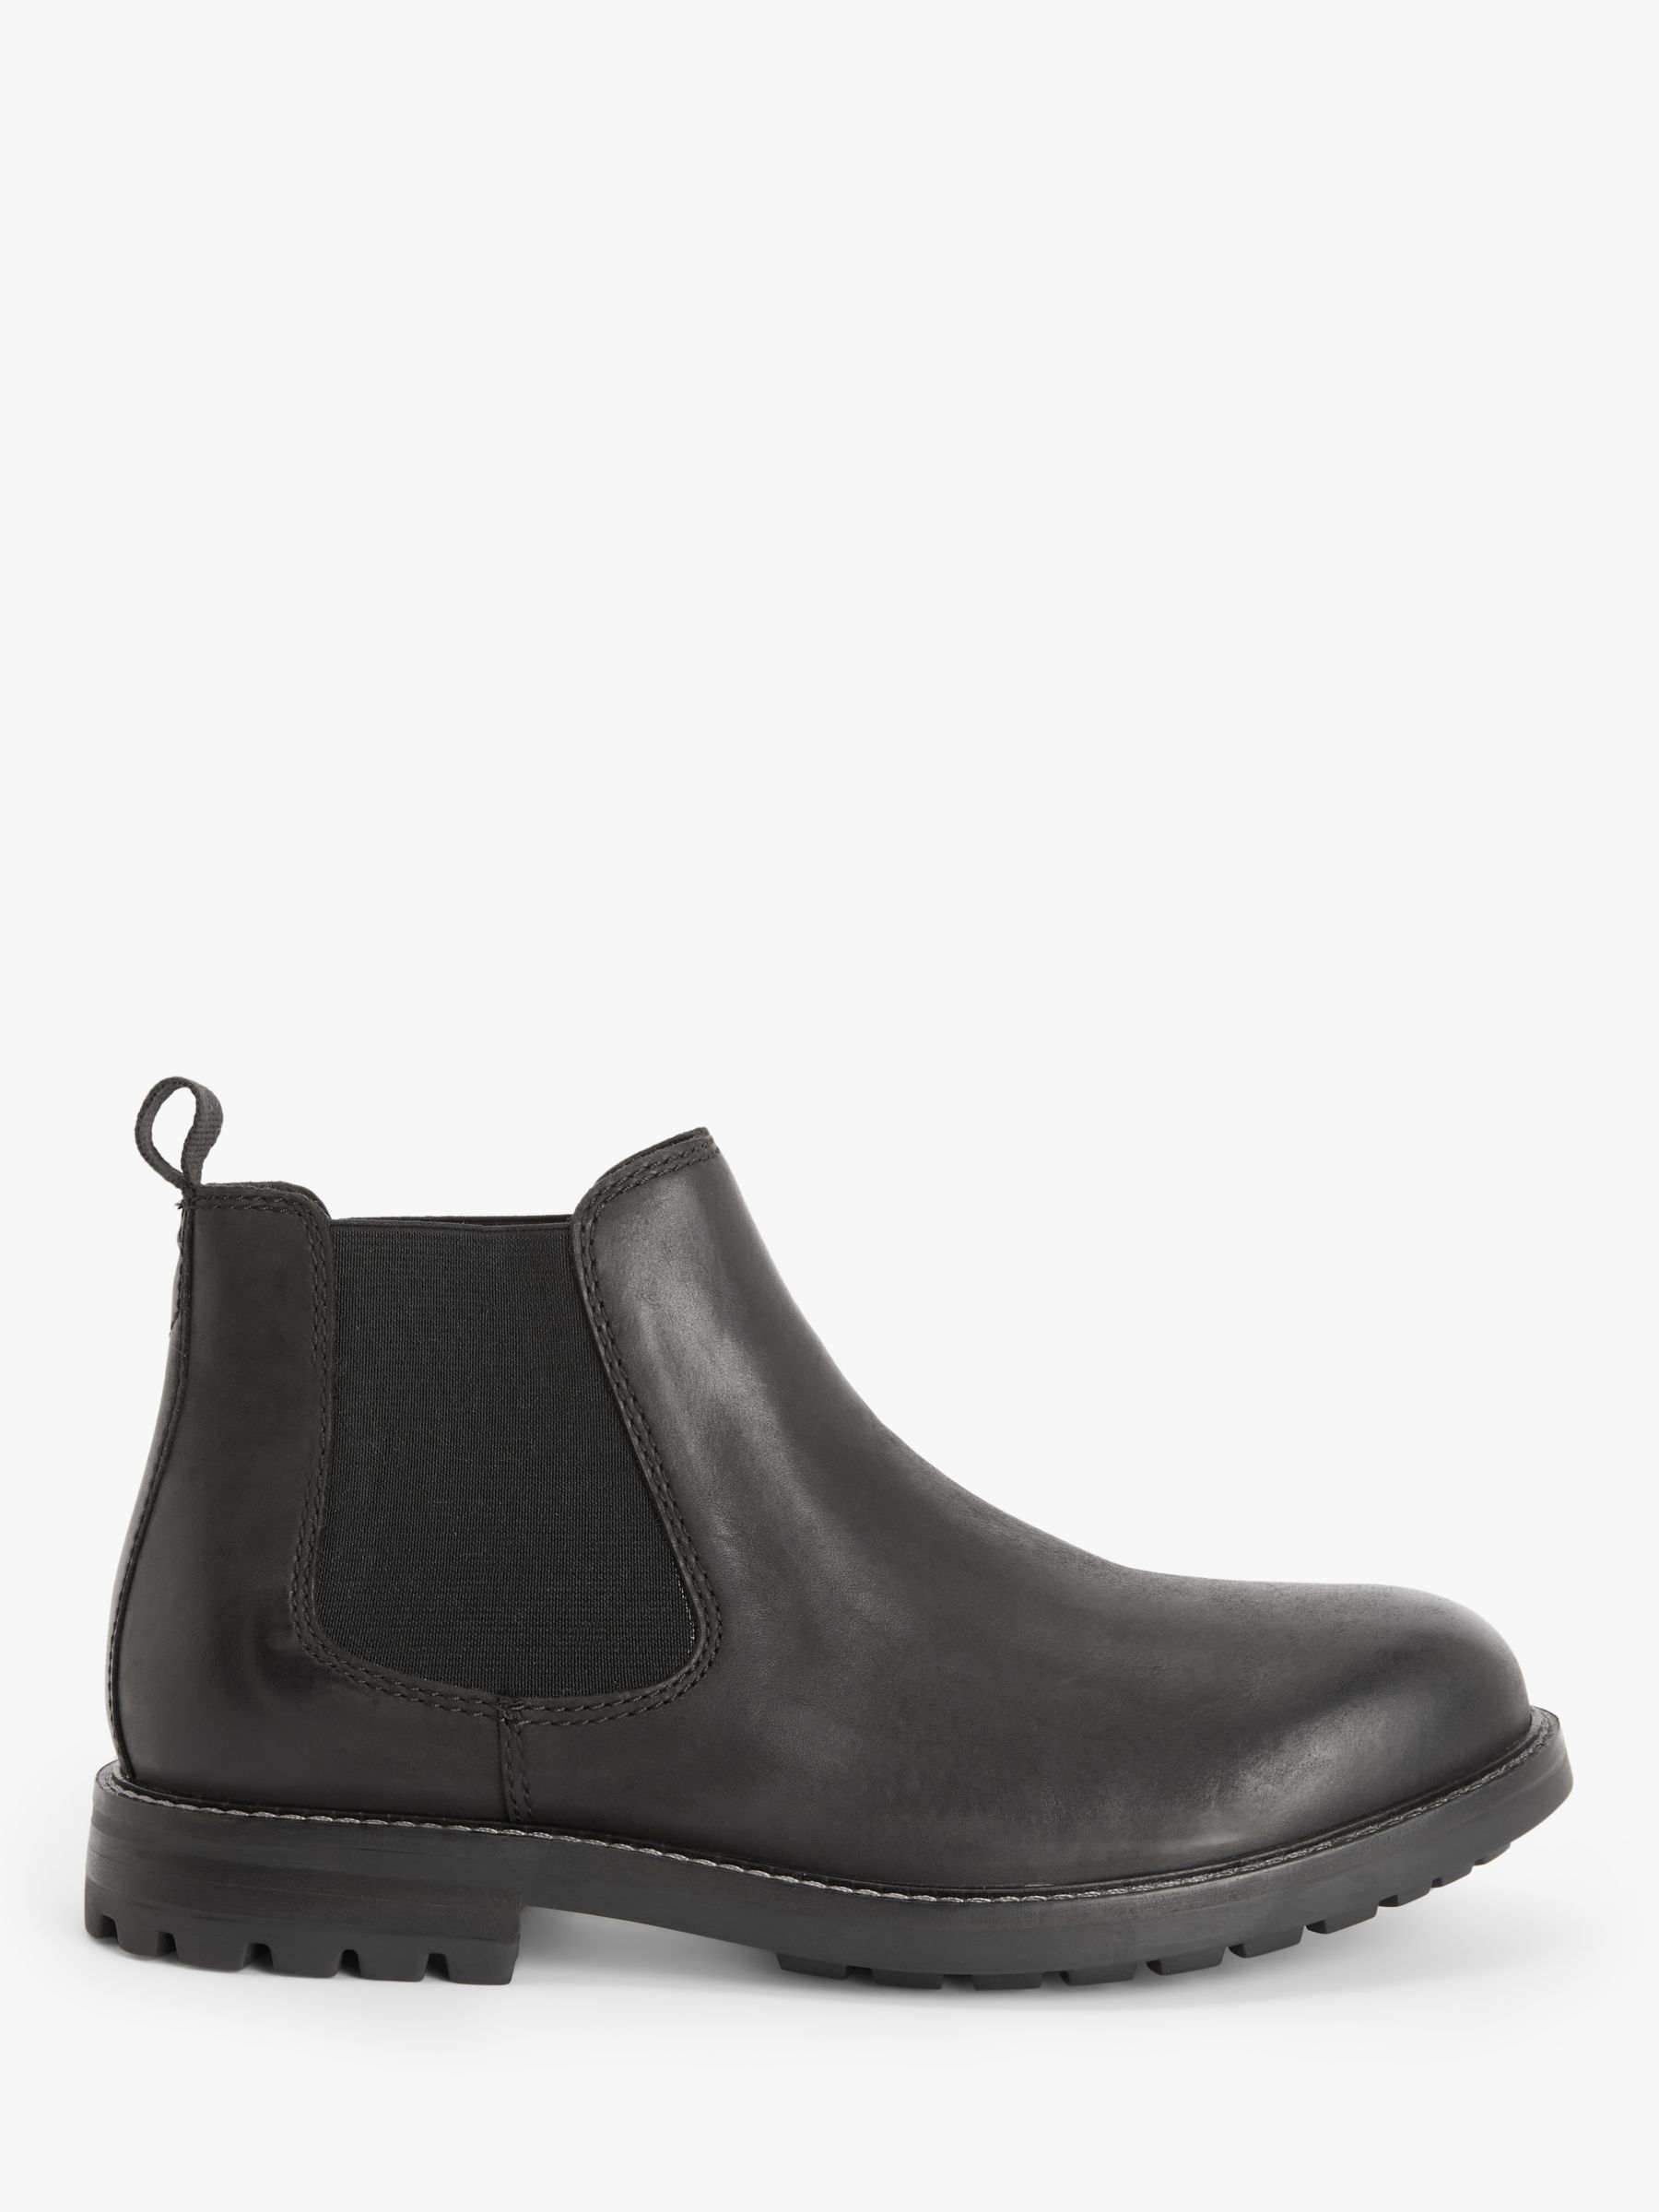 John Lewis Leather Chelsea Boots